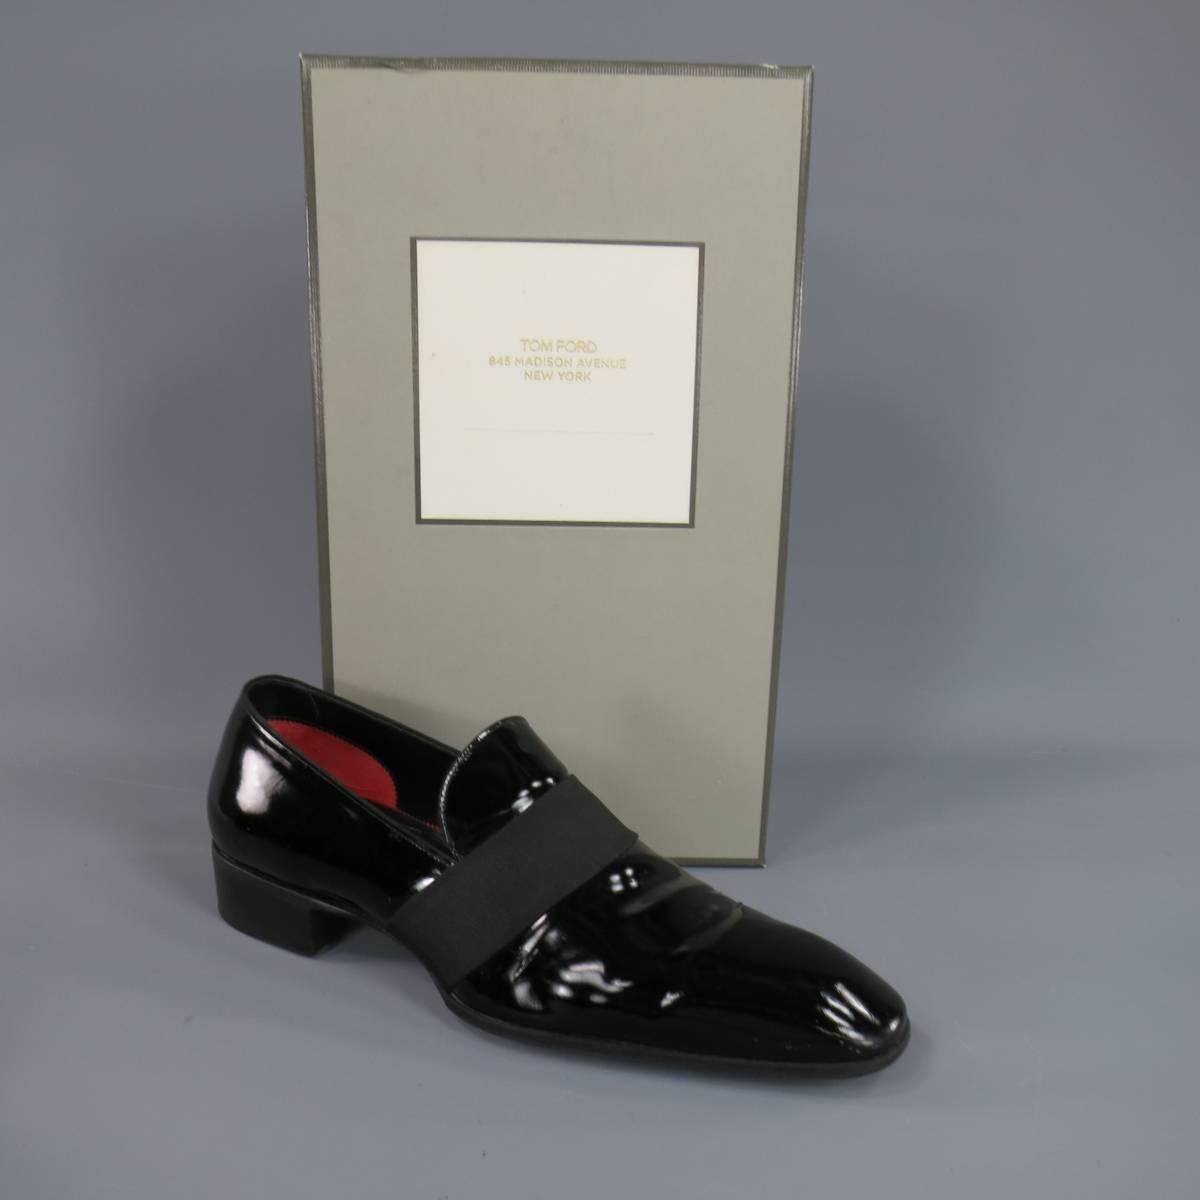 These chic Men's TOM FORD tuxedo loafers come in high gloss black patent leather with a squared pointed toe ribbon band and 1.25 inch heel. With Box. Made in Italy.

Retails at $1440.00.

Excellent Pre-Owned Condition.
Marked: Size 8 EE fits